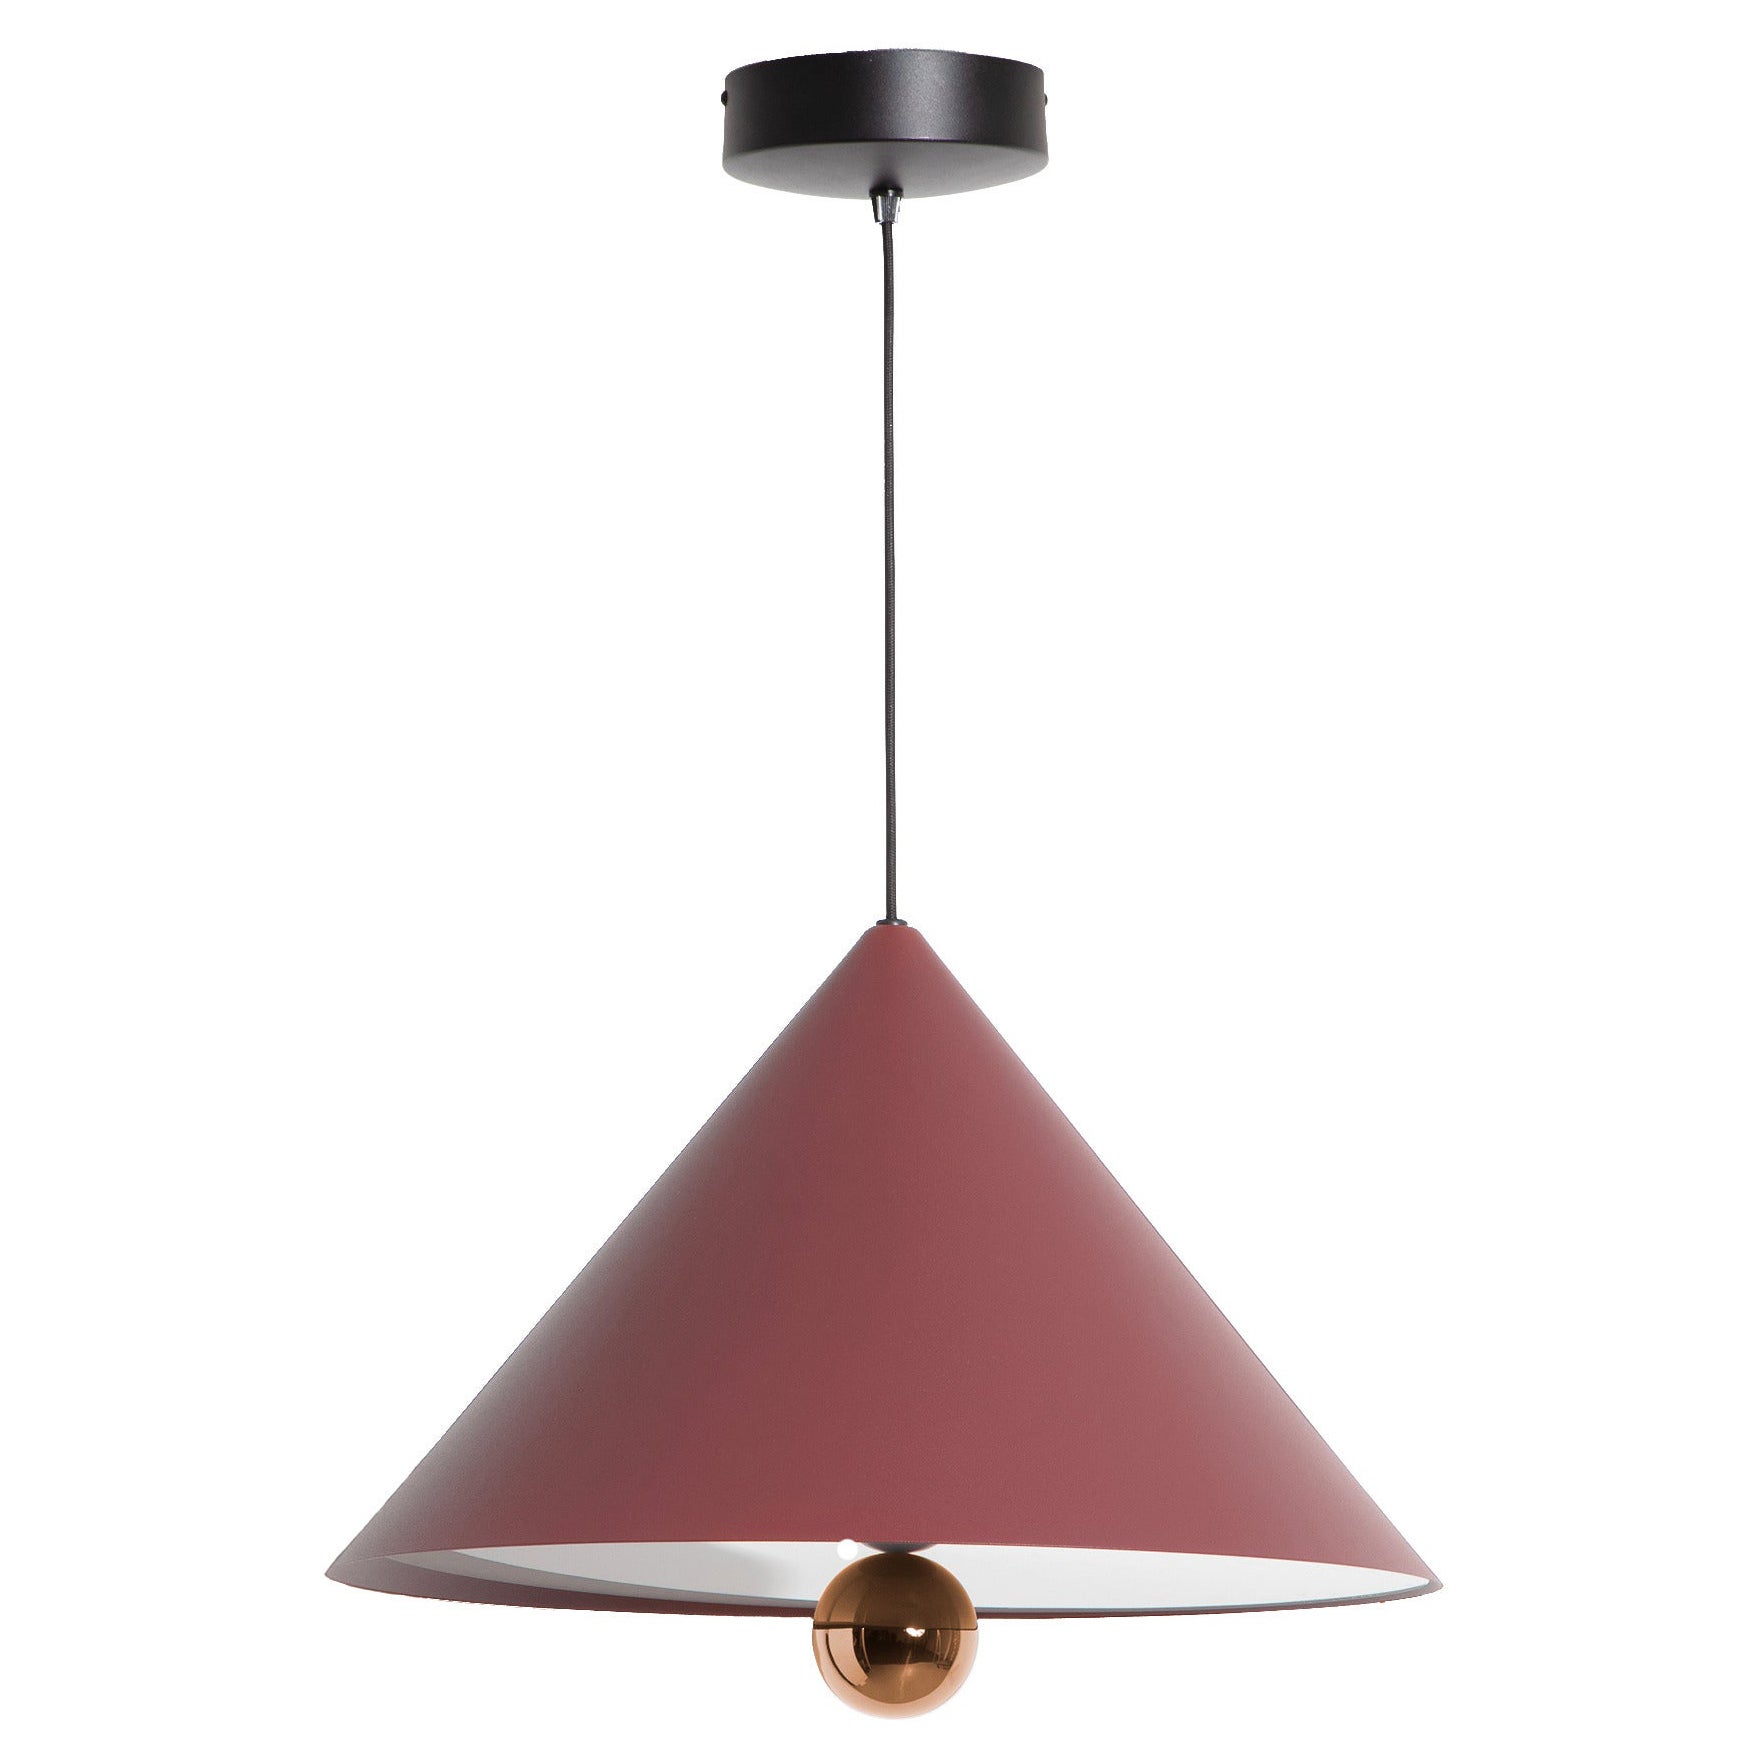 Petite Friture Large Cherry LED Pendant Light in Brown-Red & Pink Gold Aluminium